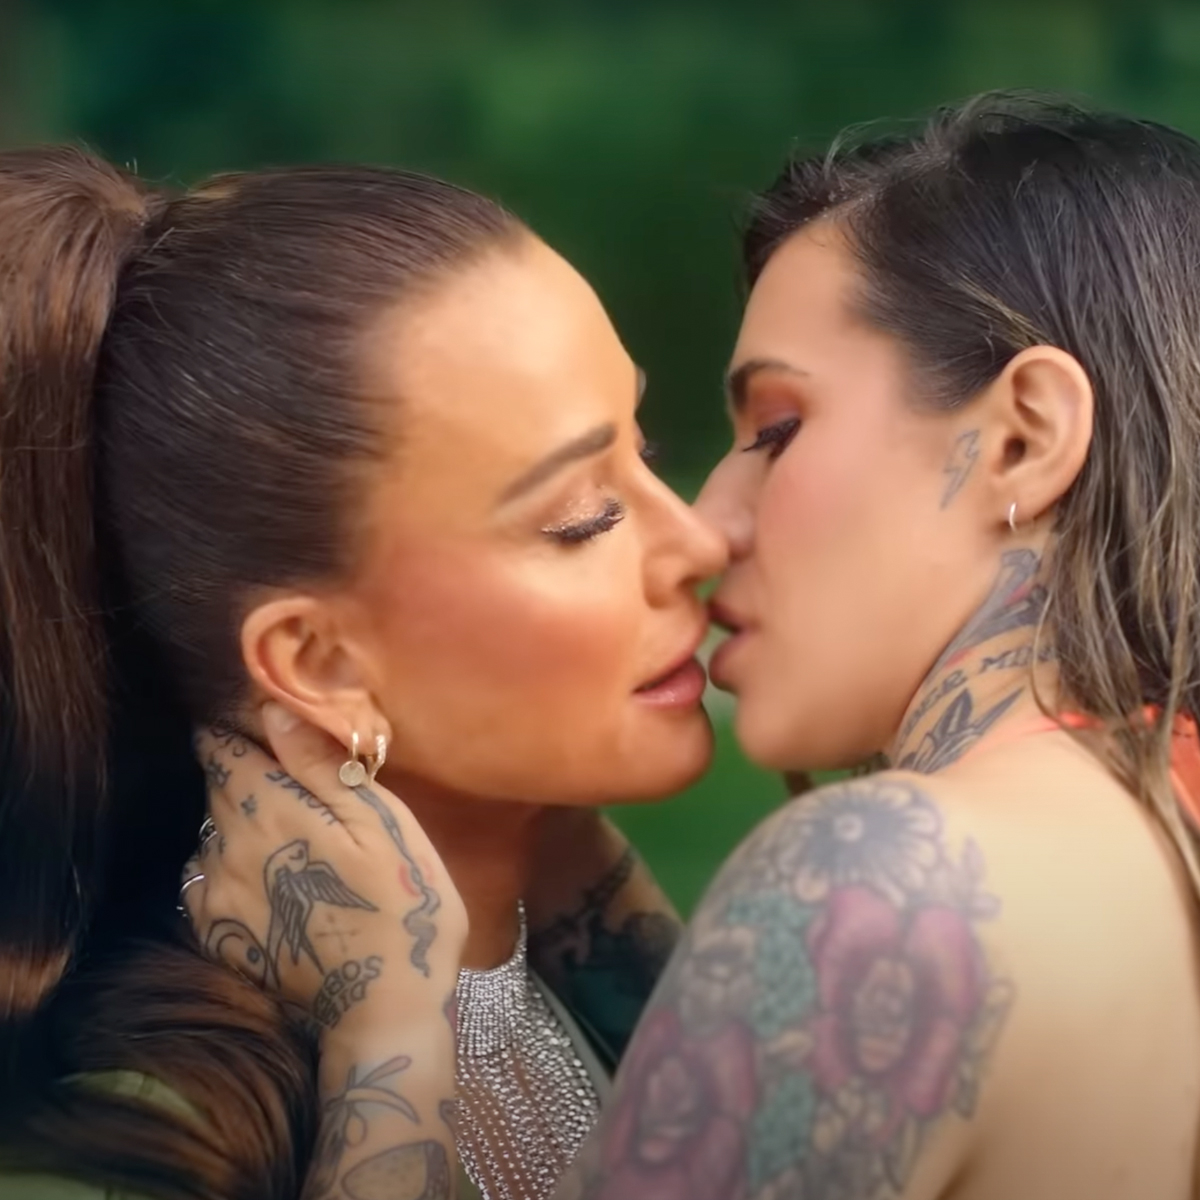 Kyle Richards & Morgan Wade Strip Down in Steamy New Music Video